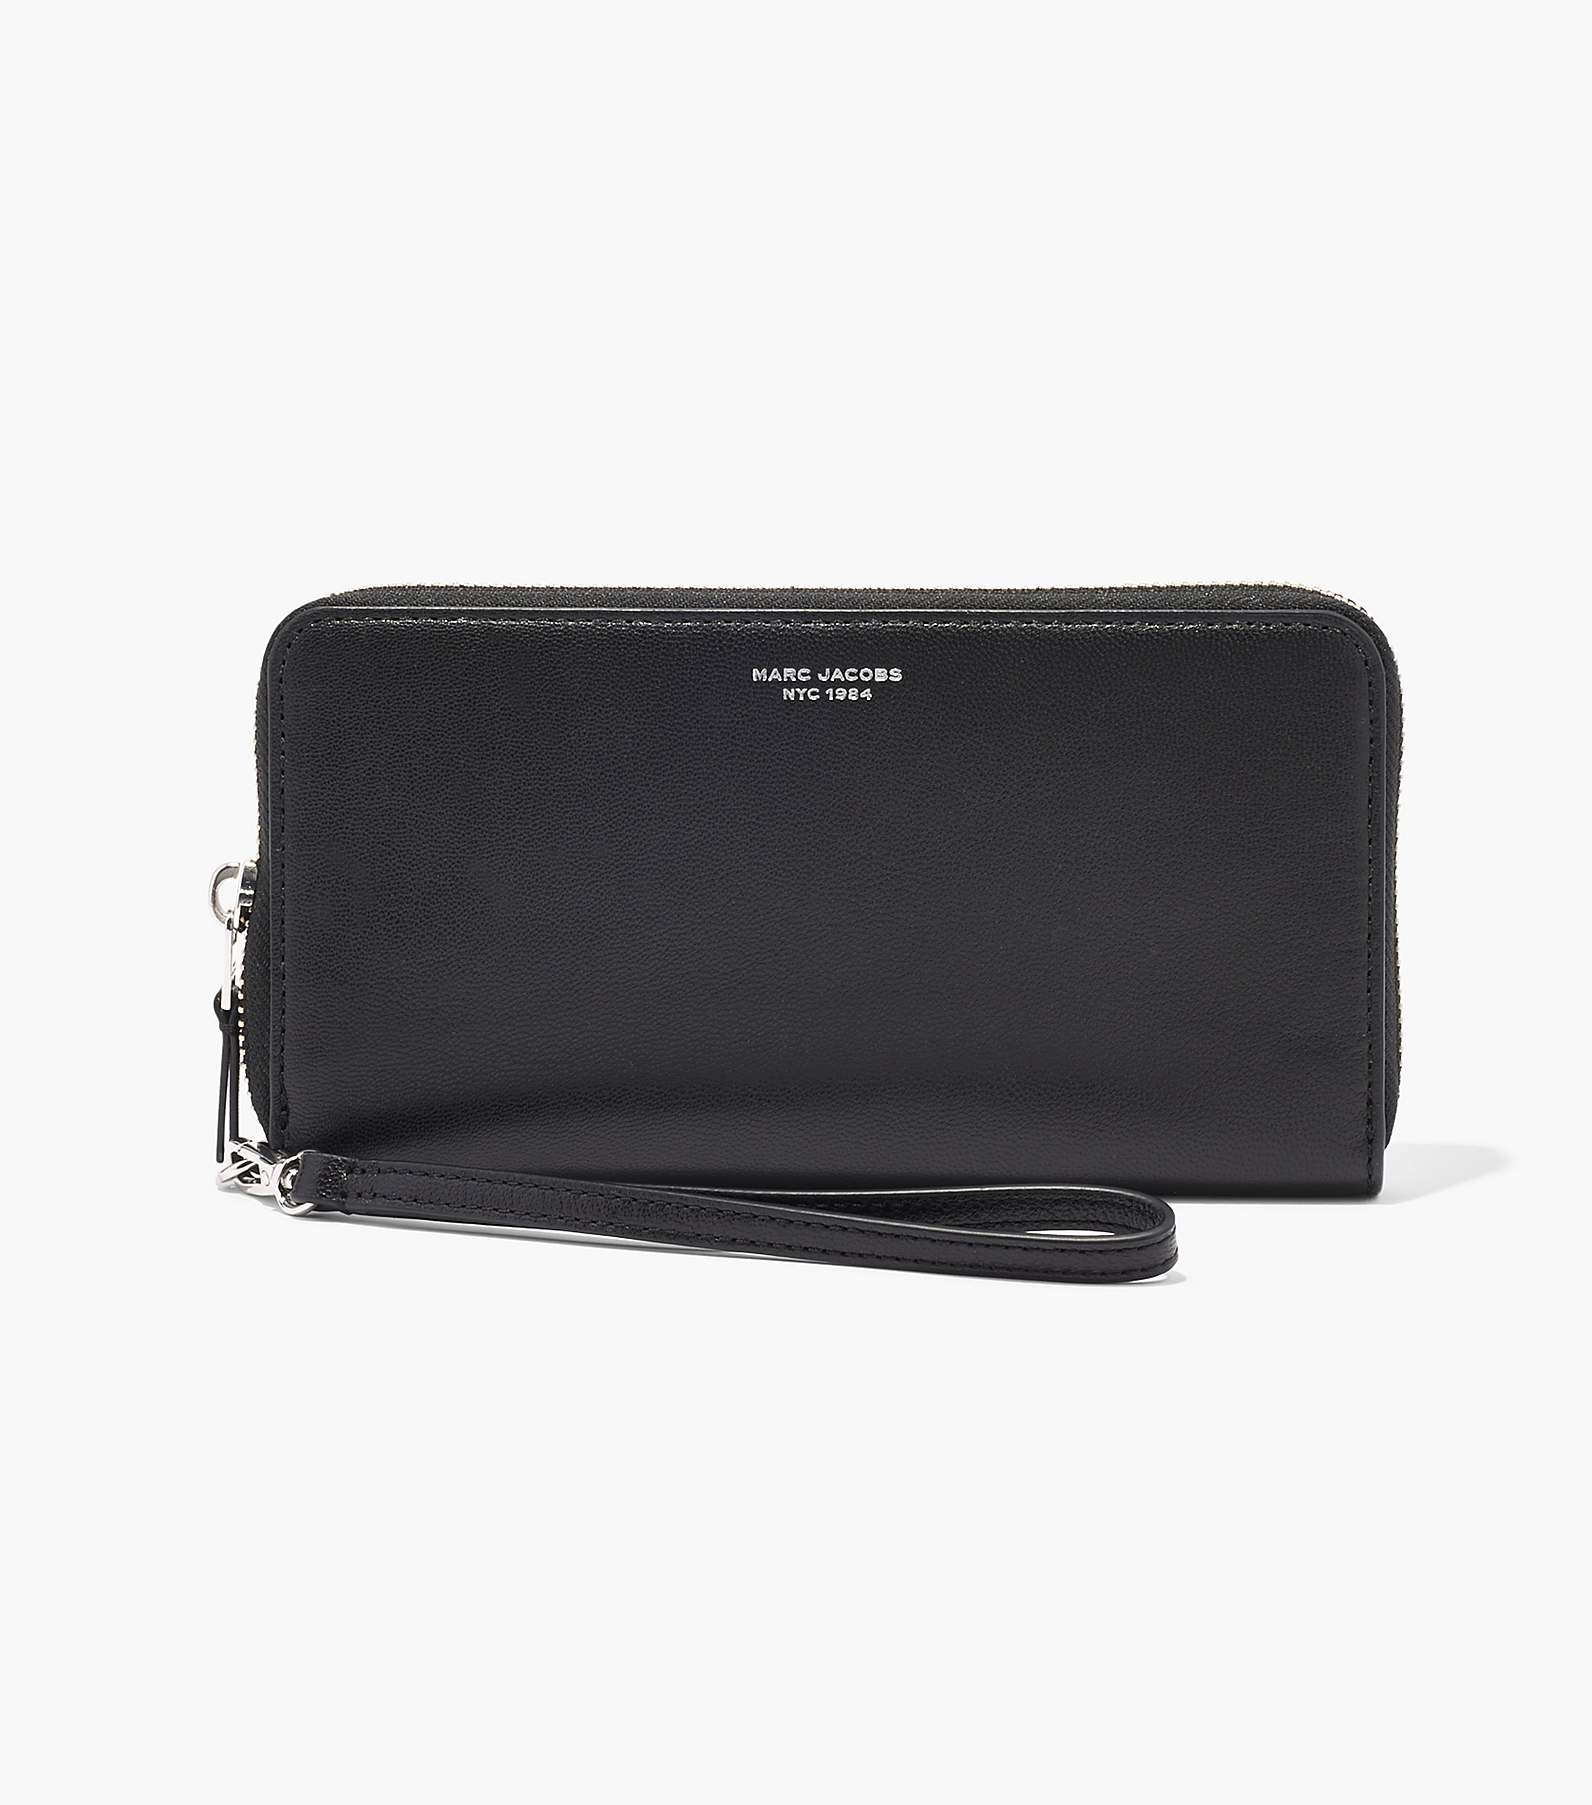 Allemaal beginsel Bandiet The Slim 84 Continental Wristlet Wallet | Marc Jacobs | Official Site